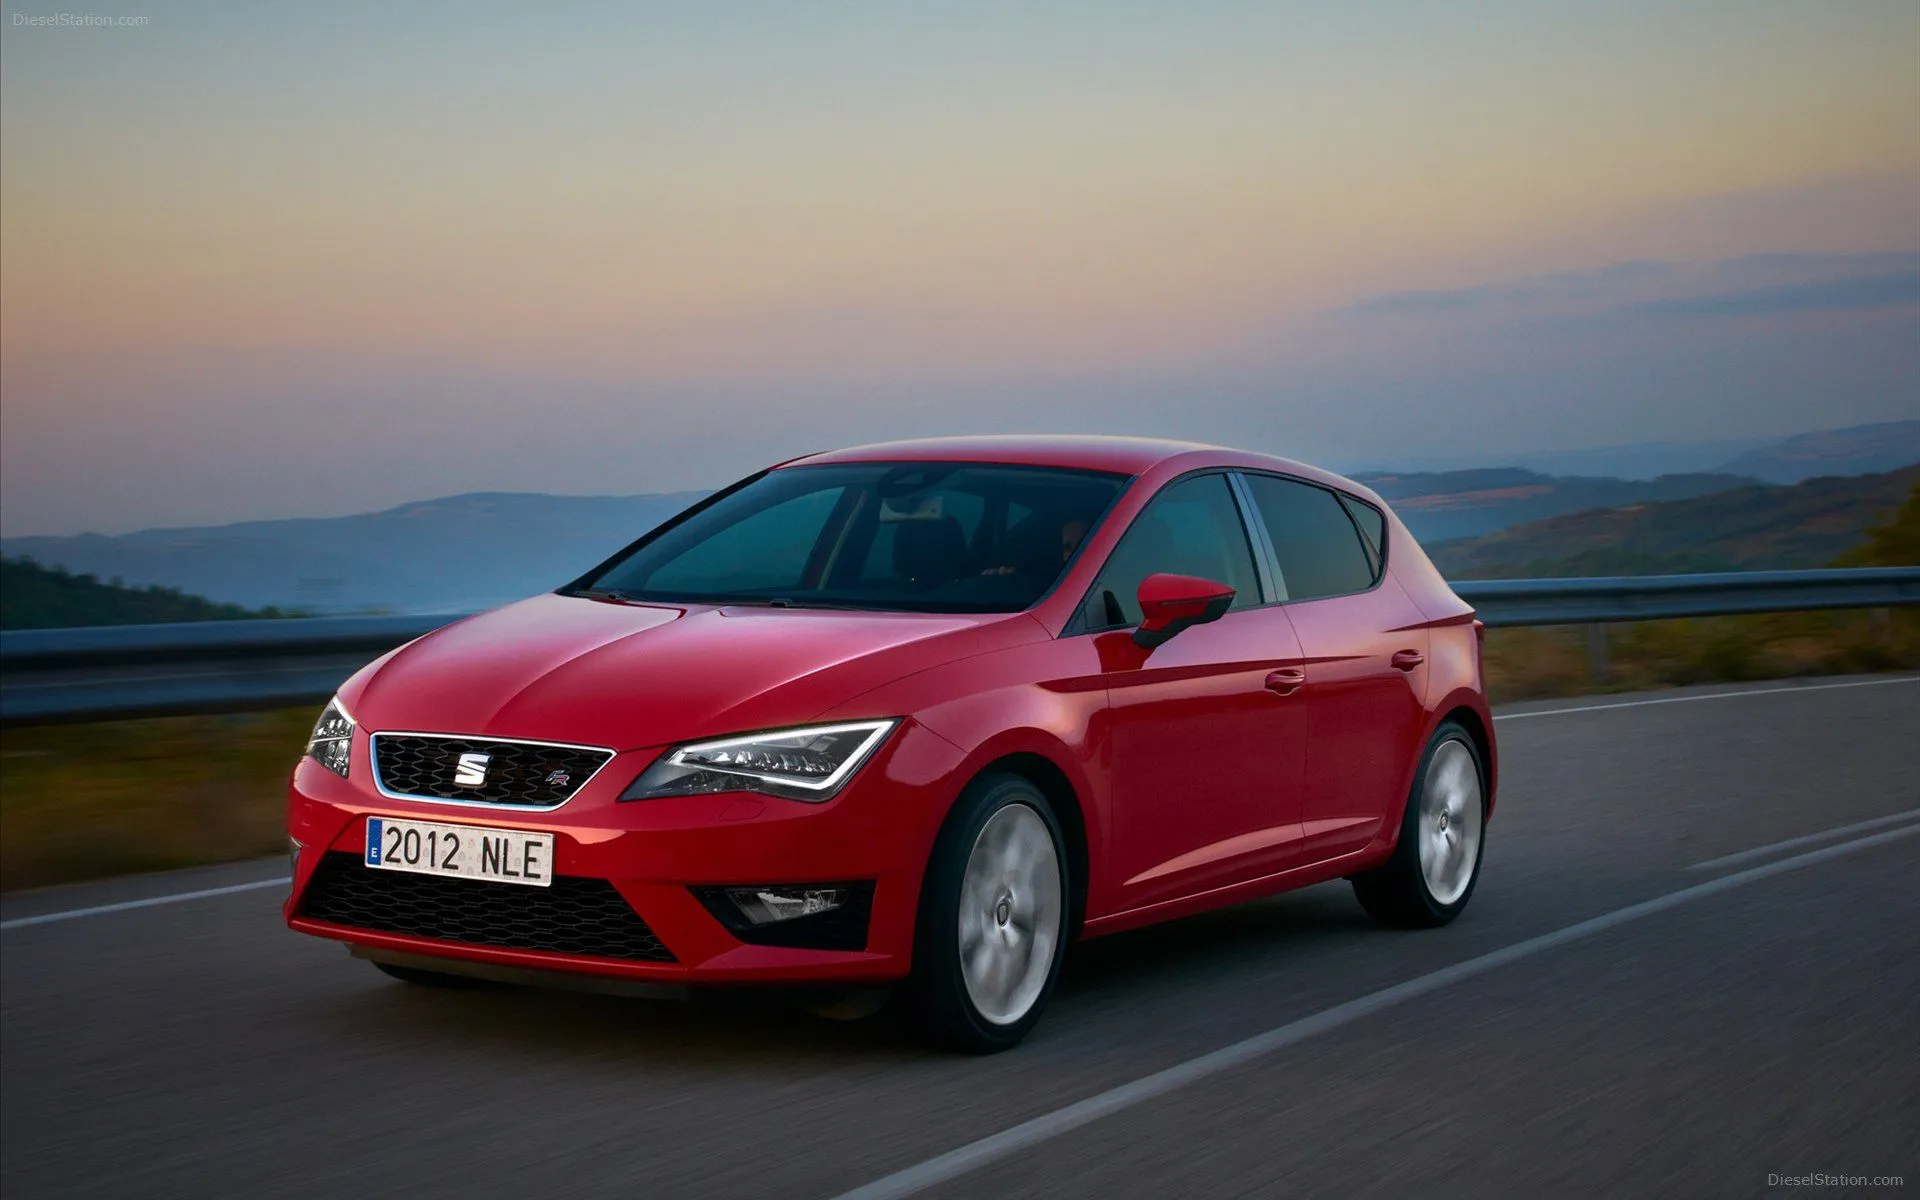 Seat Leon 2013 Widescreen Exotic Car Picture #01 of 80 : Diesel ...